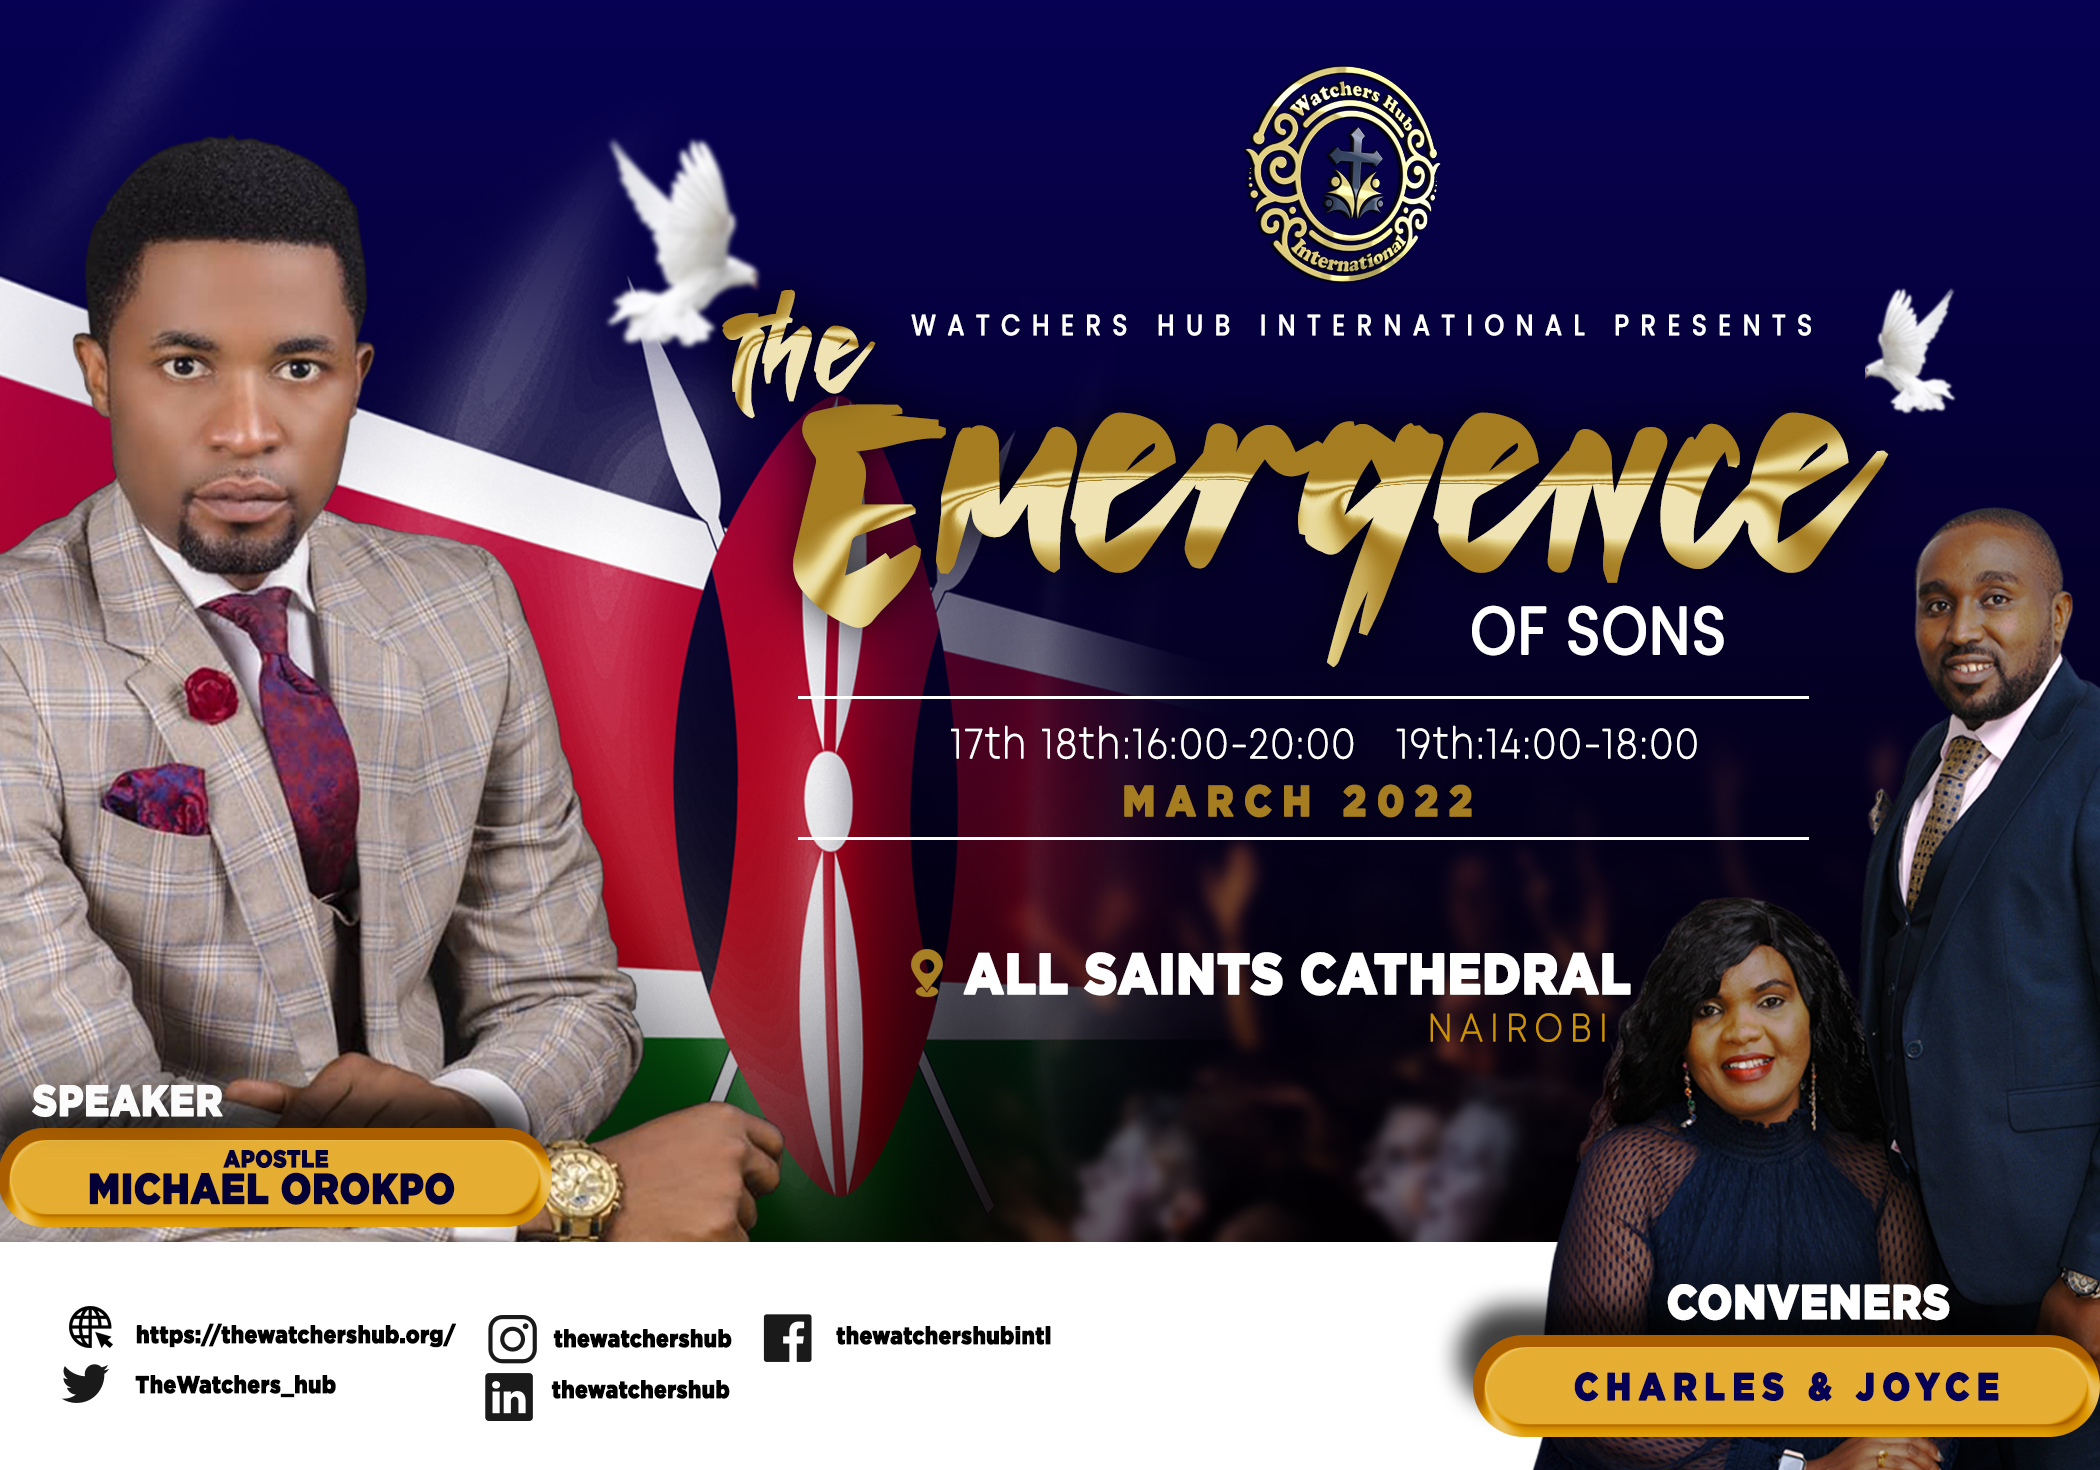 Important Information About The Emergence of Sons 2022 - Apostle Michael Orokpo